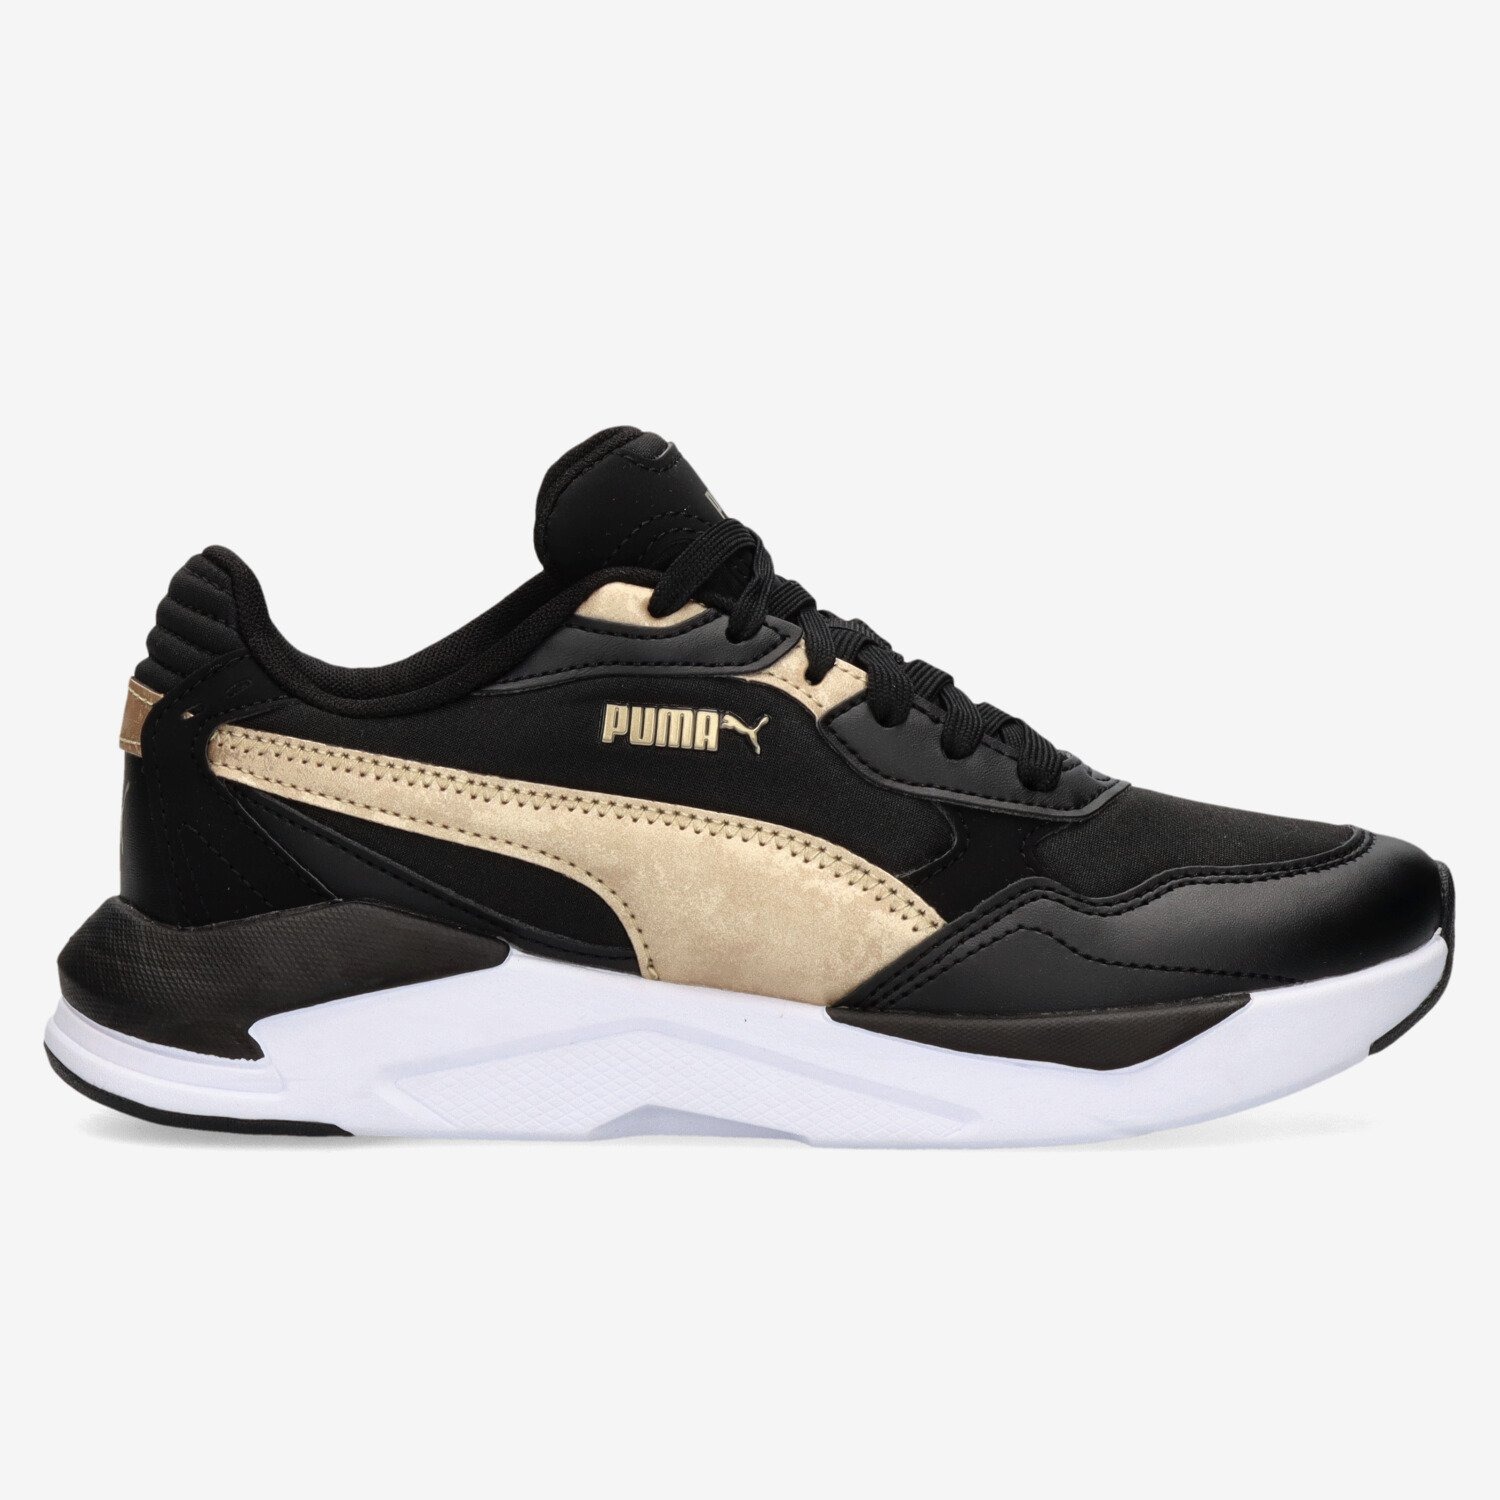 PUMA X-Ray Speed Lite Wns Dames Sneakers - Black/Gold - Maat 39